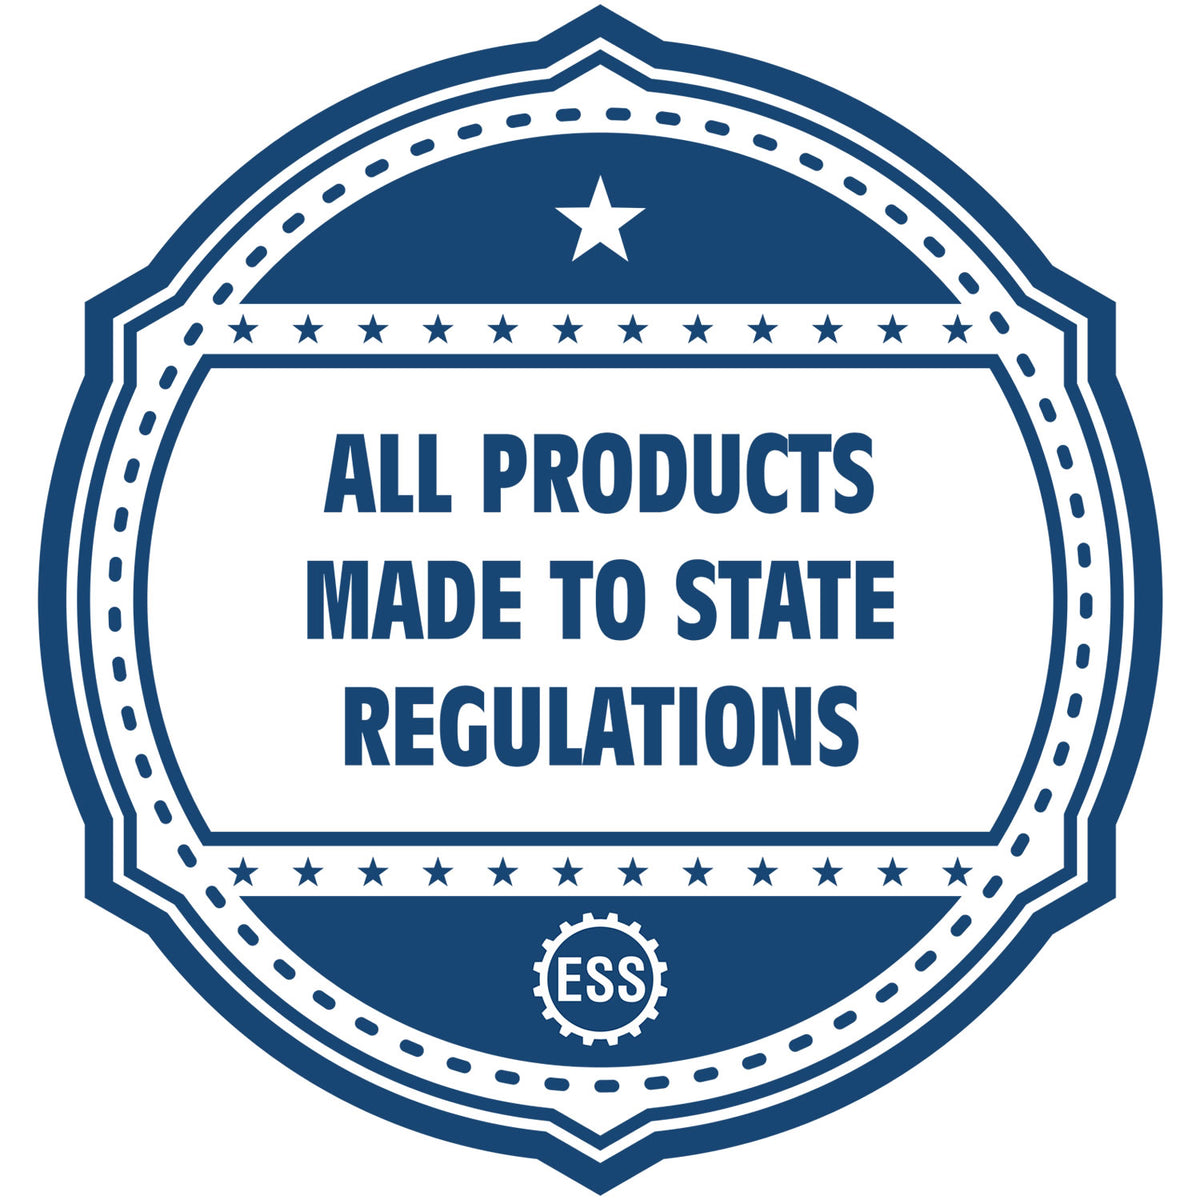 An icon or badge element for the State of Missouri Extended Long Reach Engineer Seal showing that this product is made in compliance with state regulations.